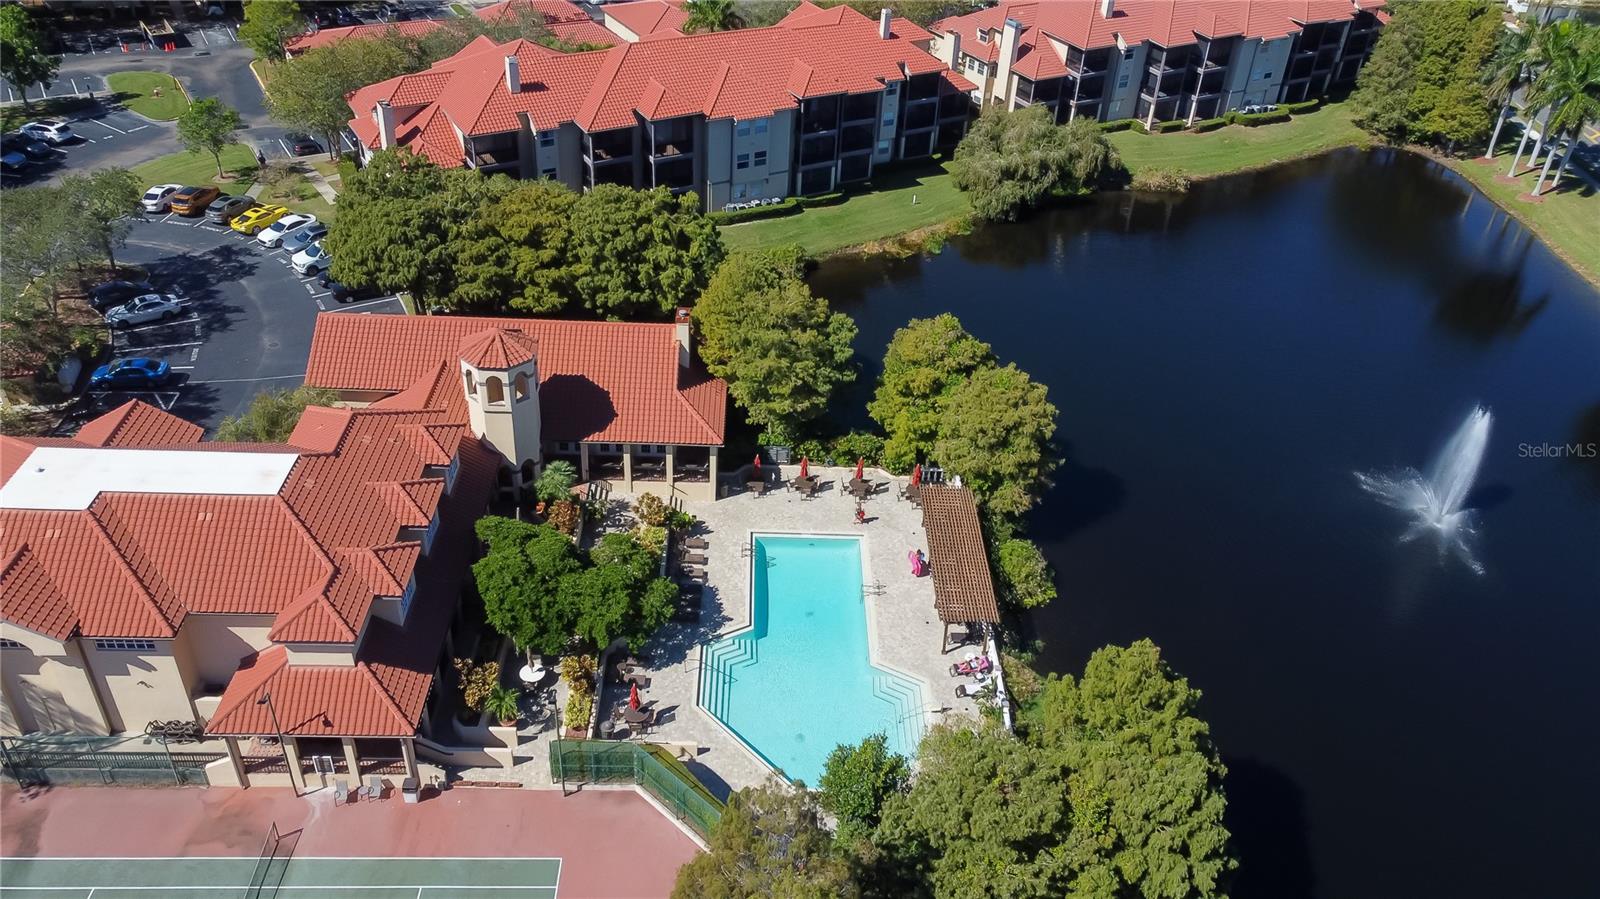 Community pool, tennis courts & clubhouse